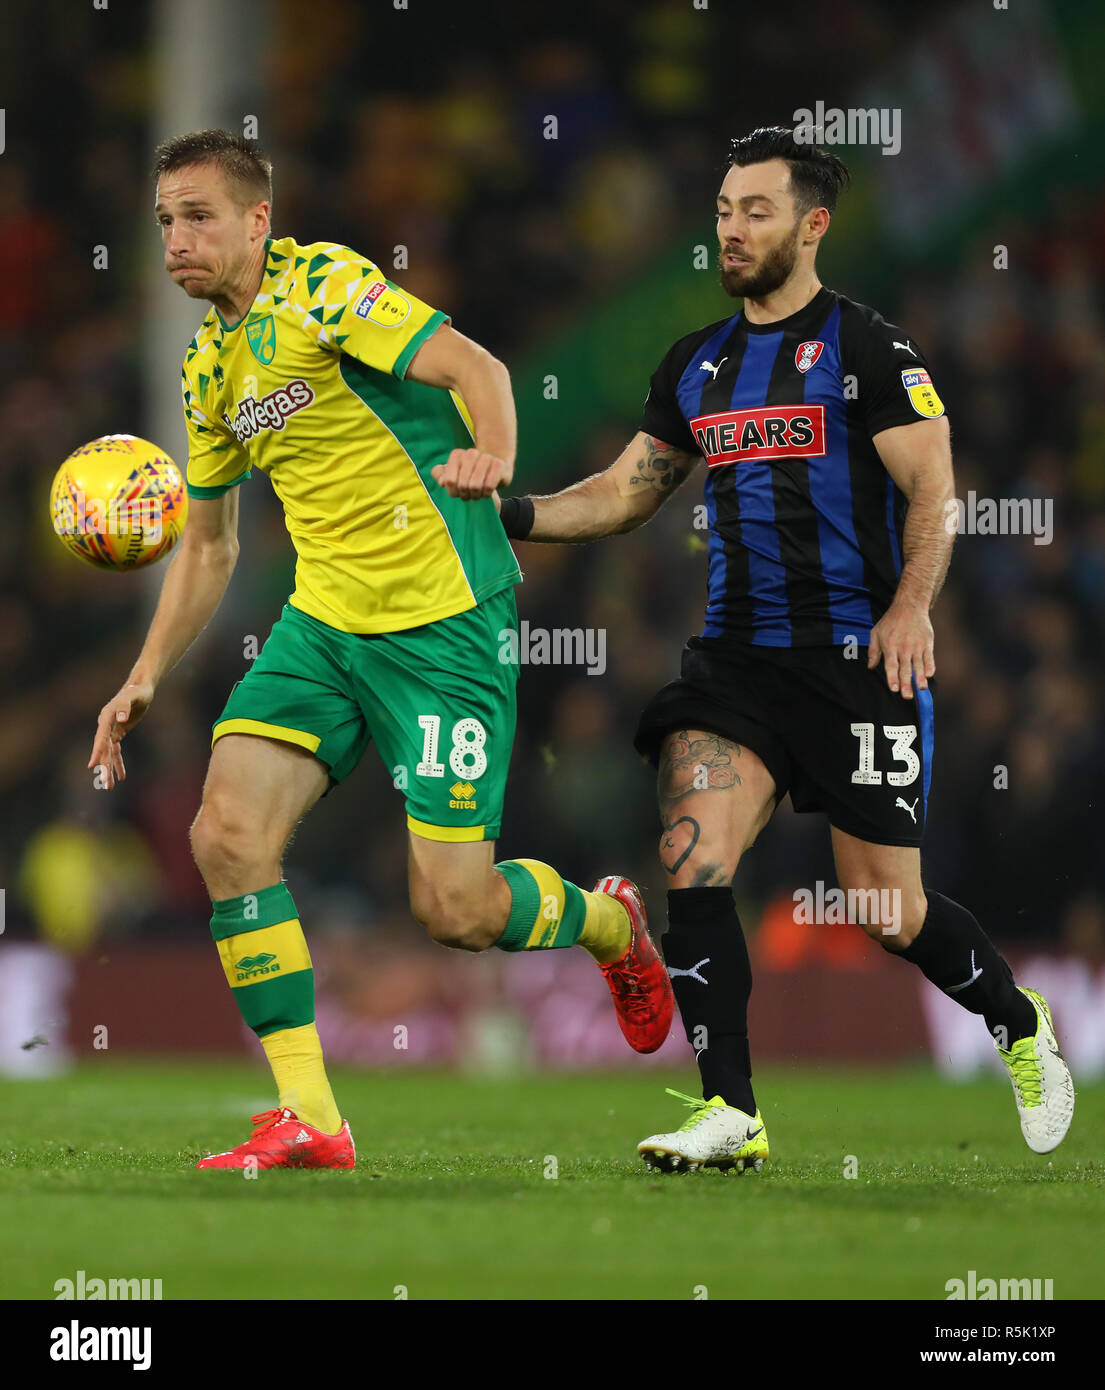 Norwich, UK. 1st December, 2018. Marco Stiepermann of Norwich City bea6s Richie Towell of Rotherham United - Norwich City v Rotherham United, Sky Bet Championship, Carrow Road, Norwich - 1st December 2018  Editorial Use Only - DataCo restrictions apply Credit: MatchDay Images Limited/Alamy Live News Stock Photo